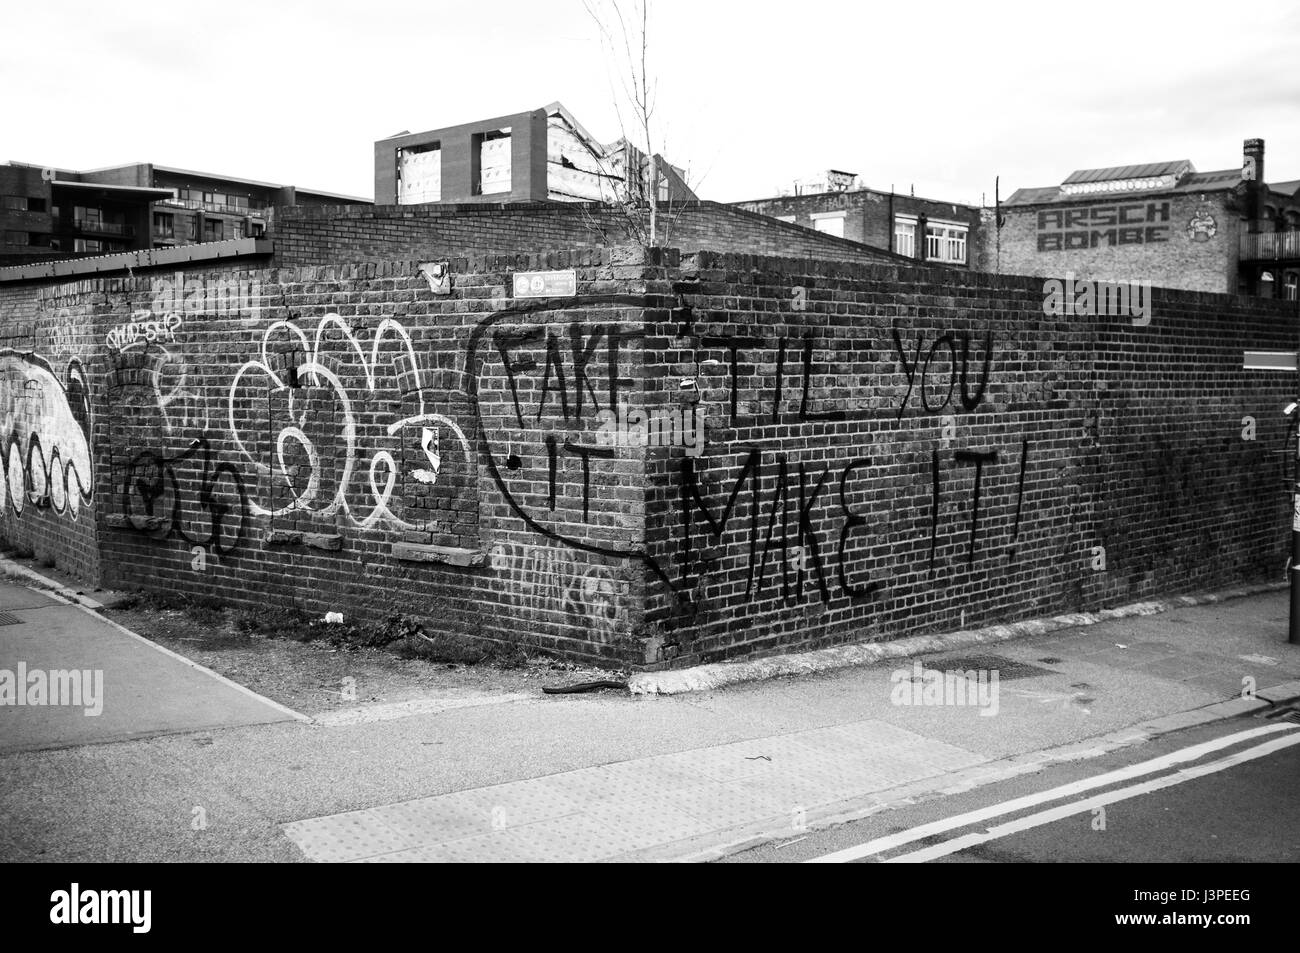 Corner of streets in Hackney Wick with graffiti saying 'Fake it 'til you make it' scrawled across. Stock Photo